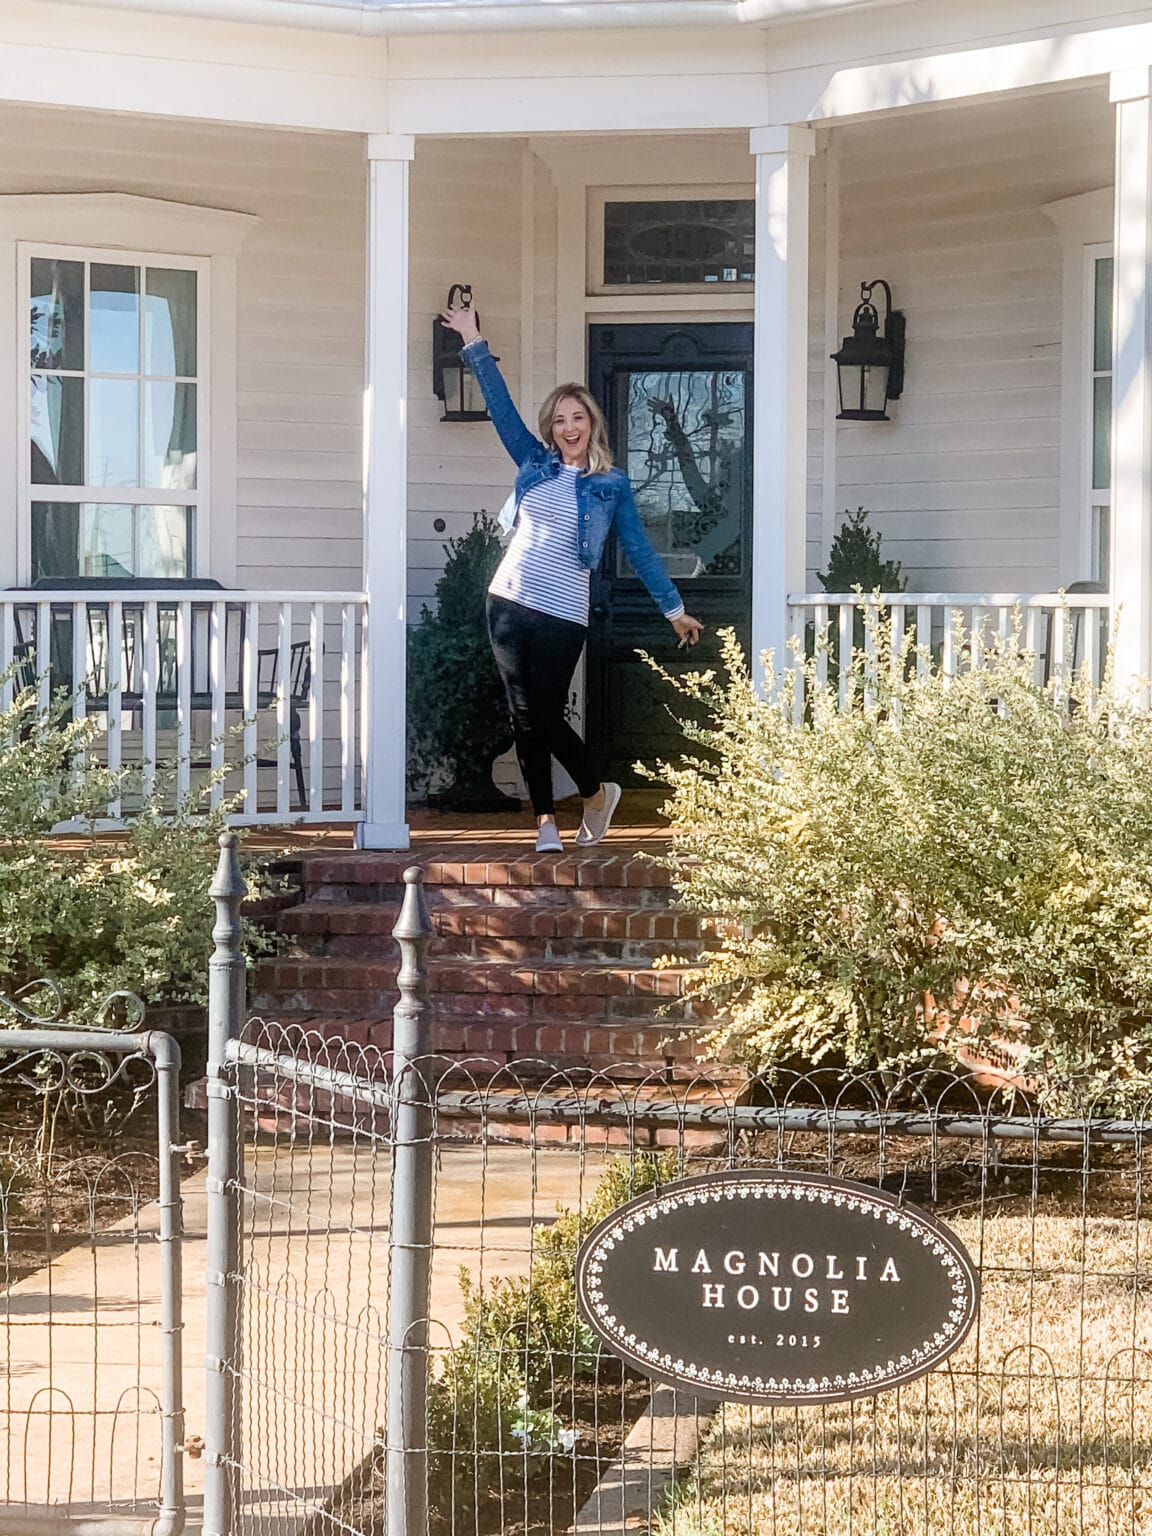 Our Stay at the Magnolia House – jaime lyn